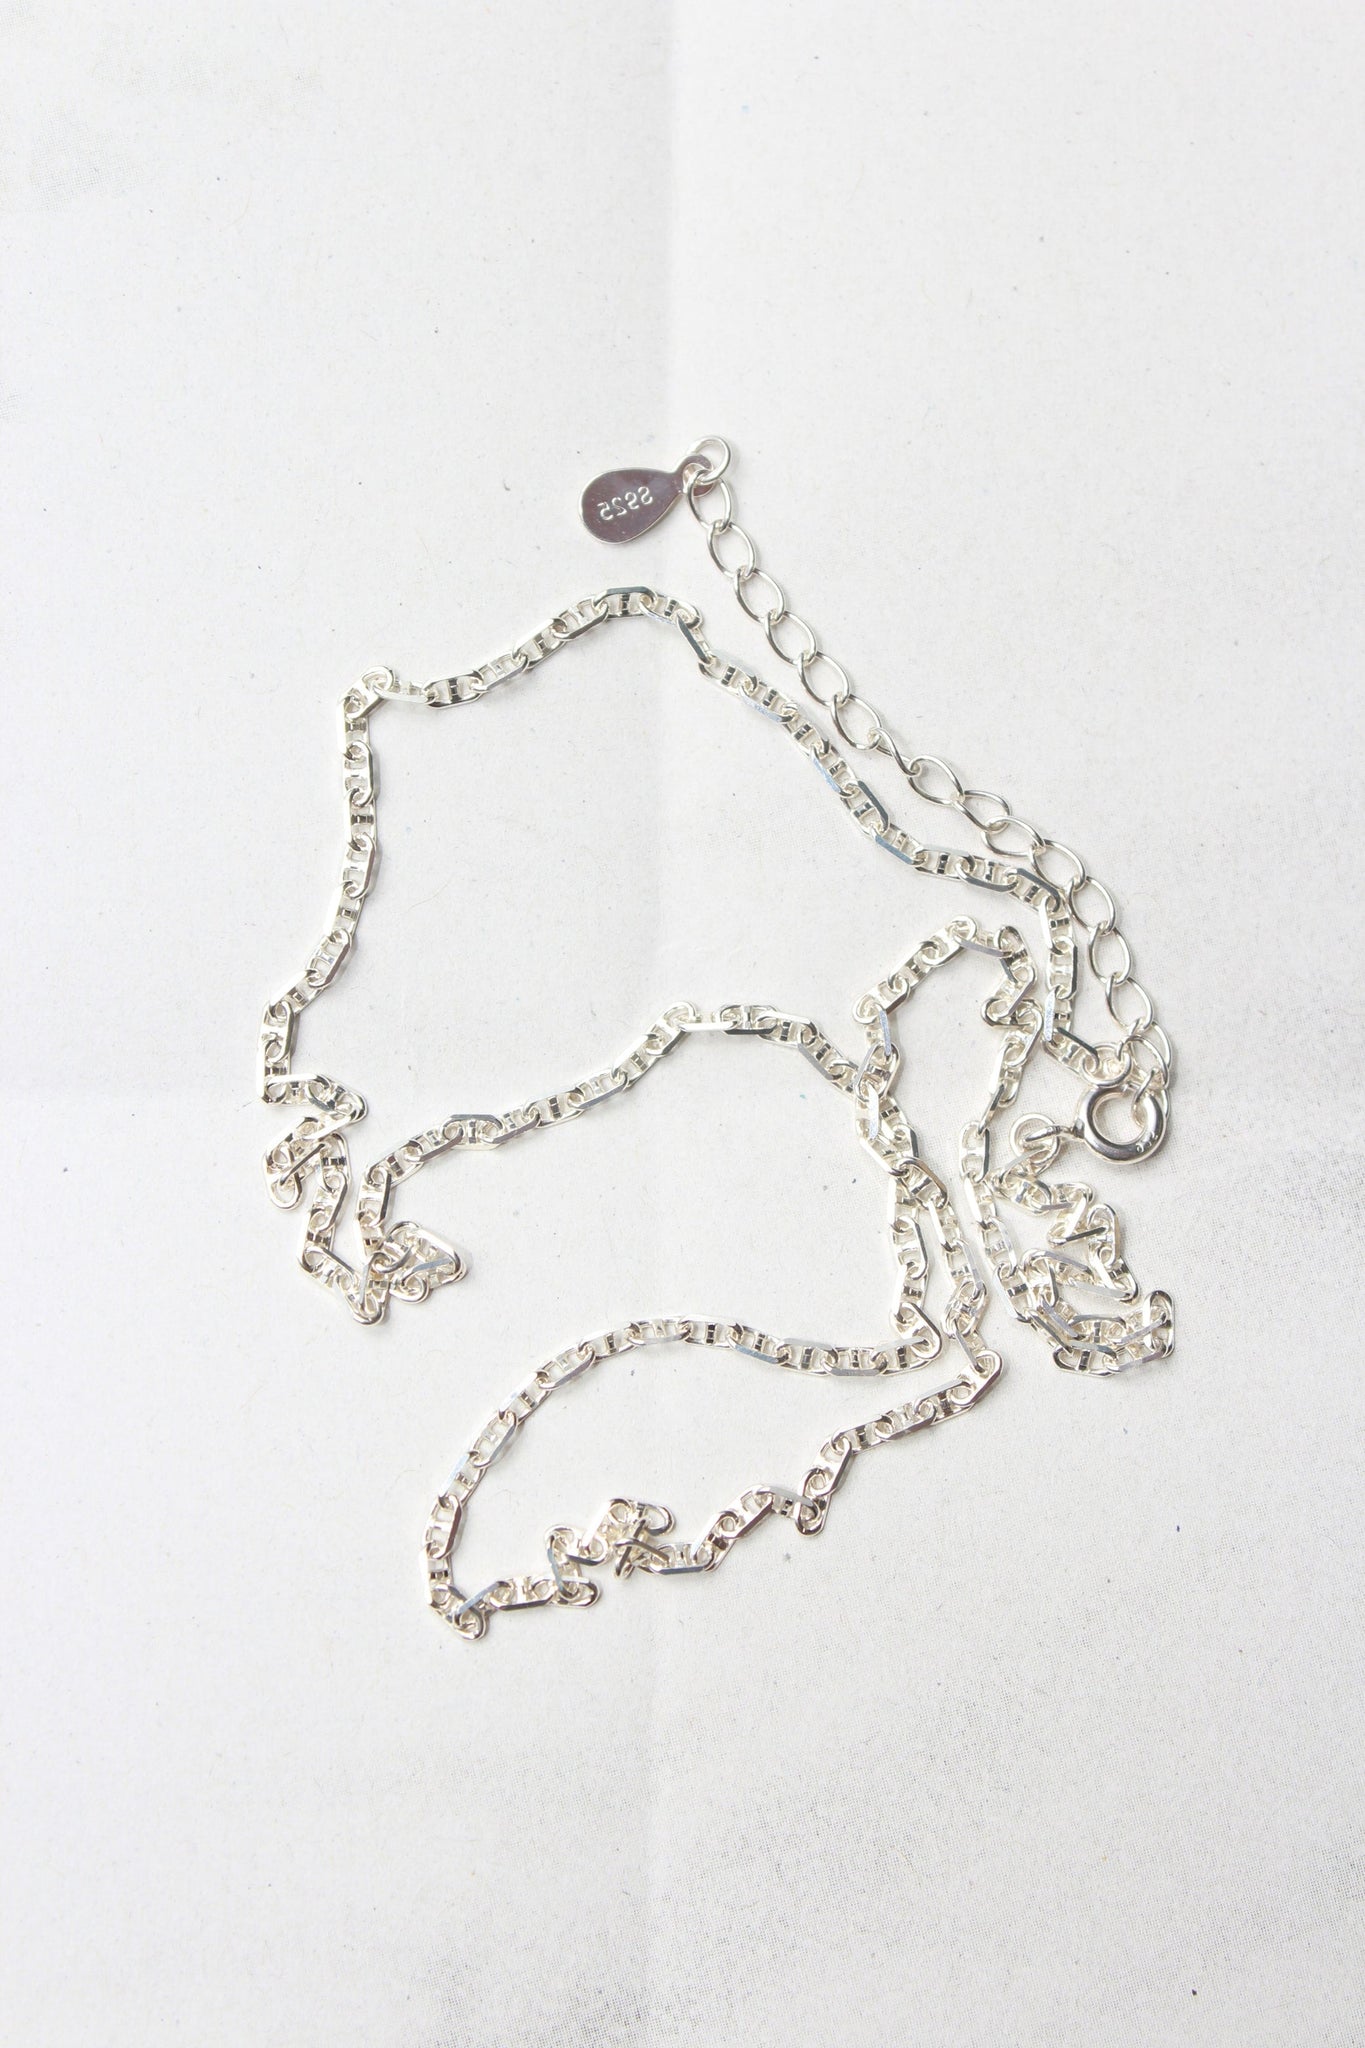 Dainty mariner chain Necklace in Silver